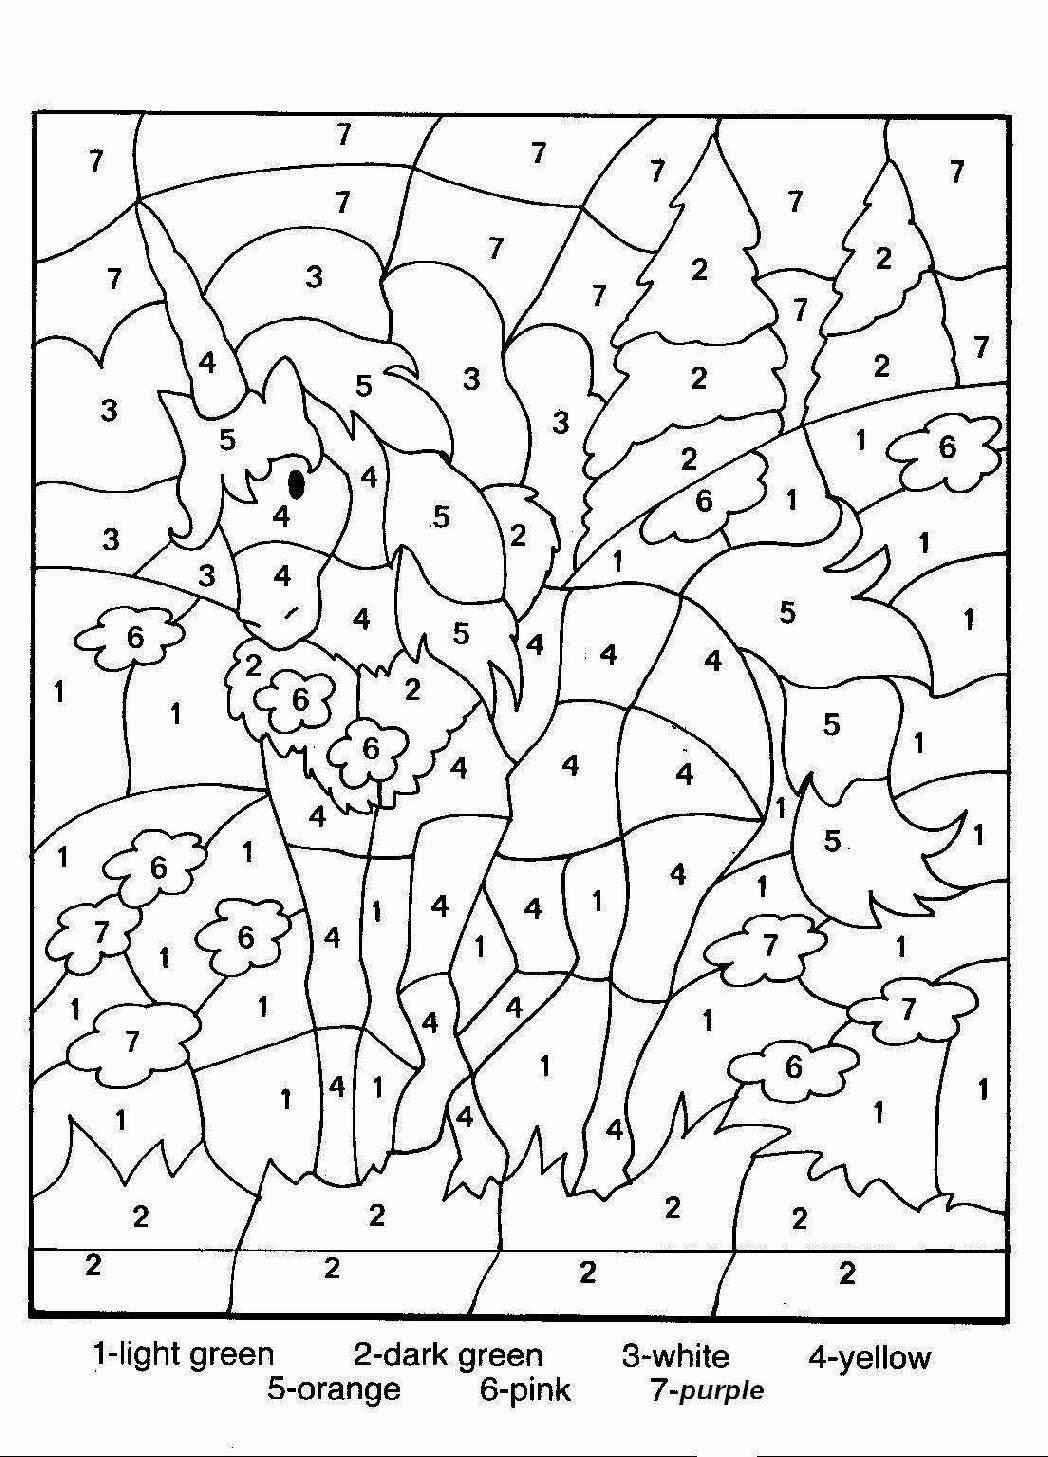 Coloring Pages : Math Coloring Worksheets Free Printable with Printable Multiplication Coloring Worksheets